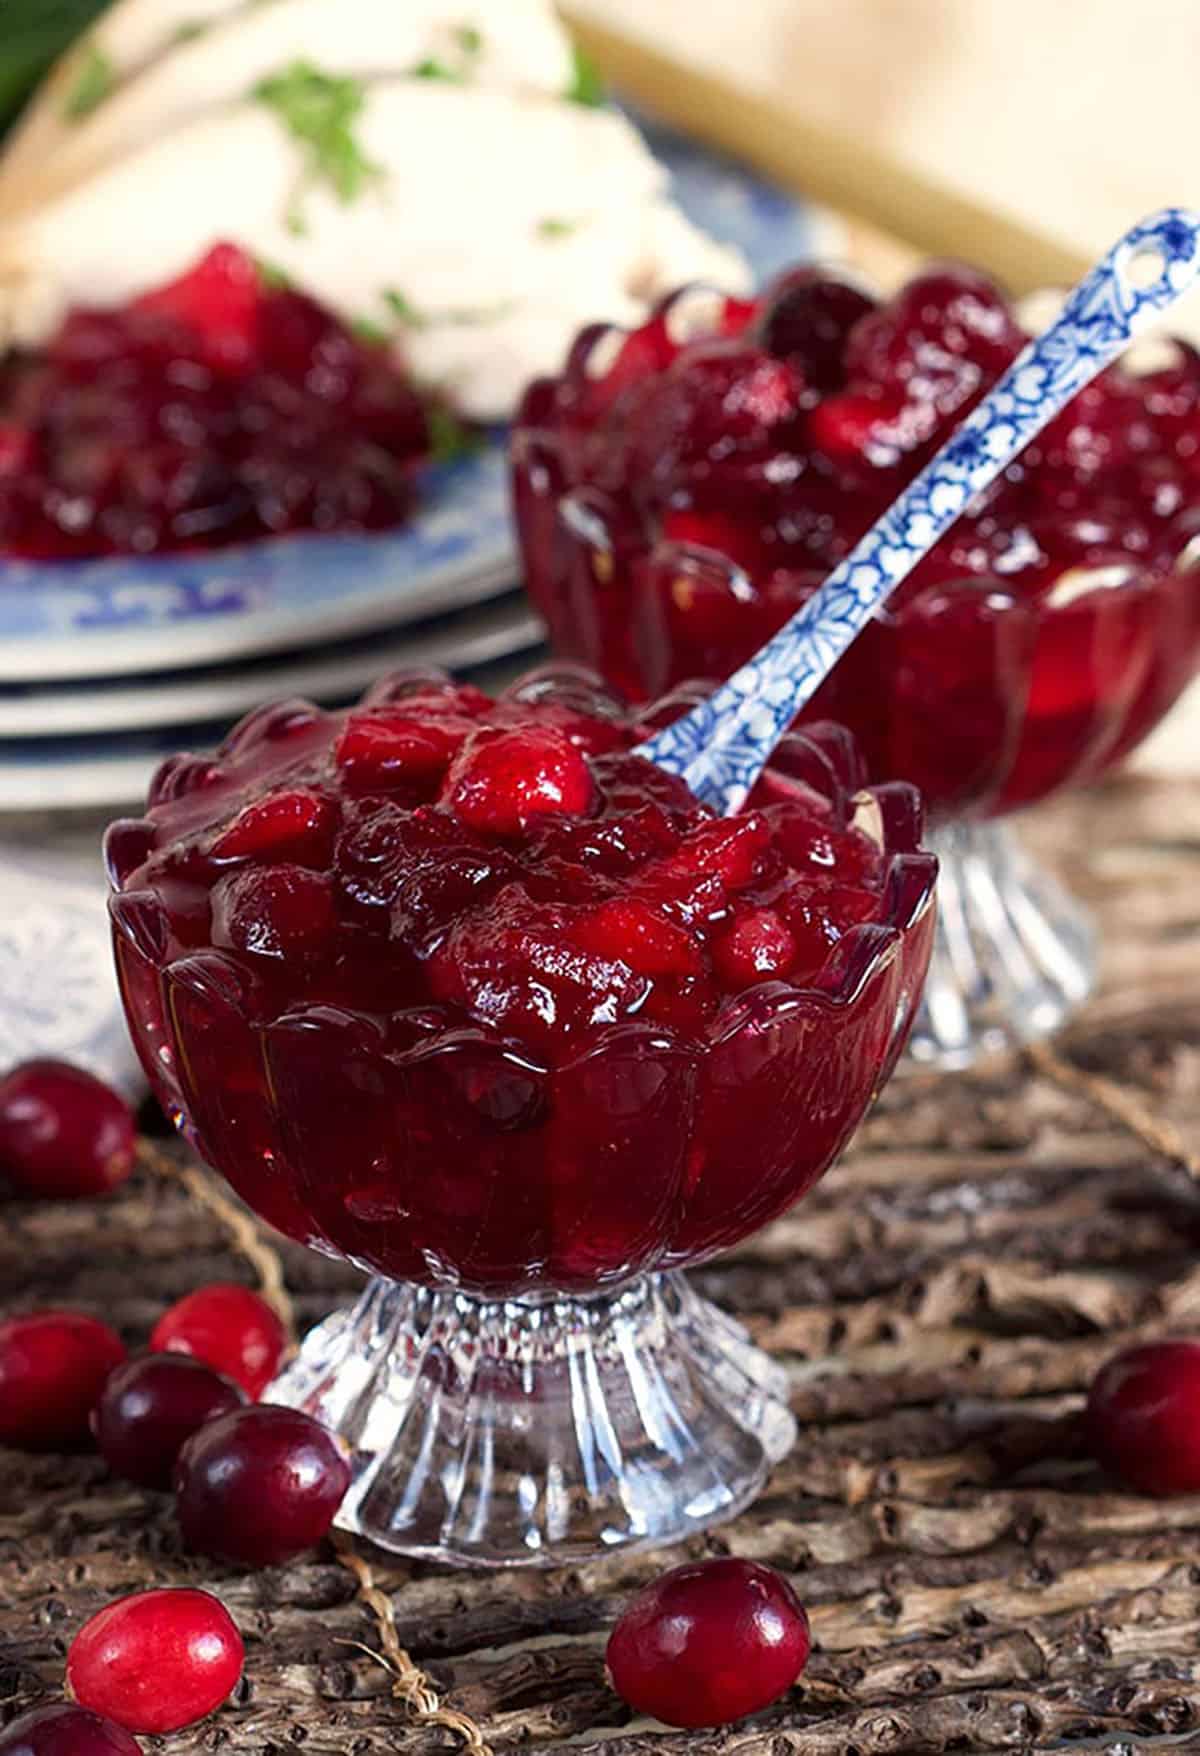 Cranberry sauce in a glass dessert bowl on a placemat made with twigs.